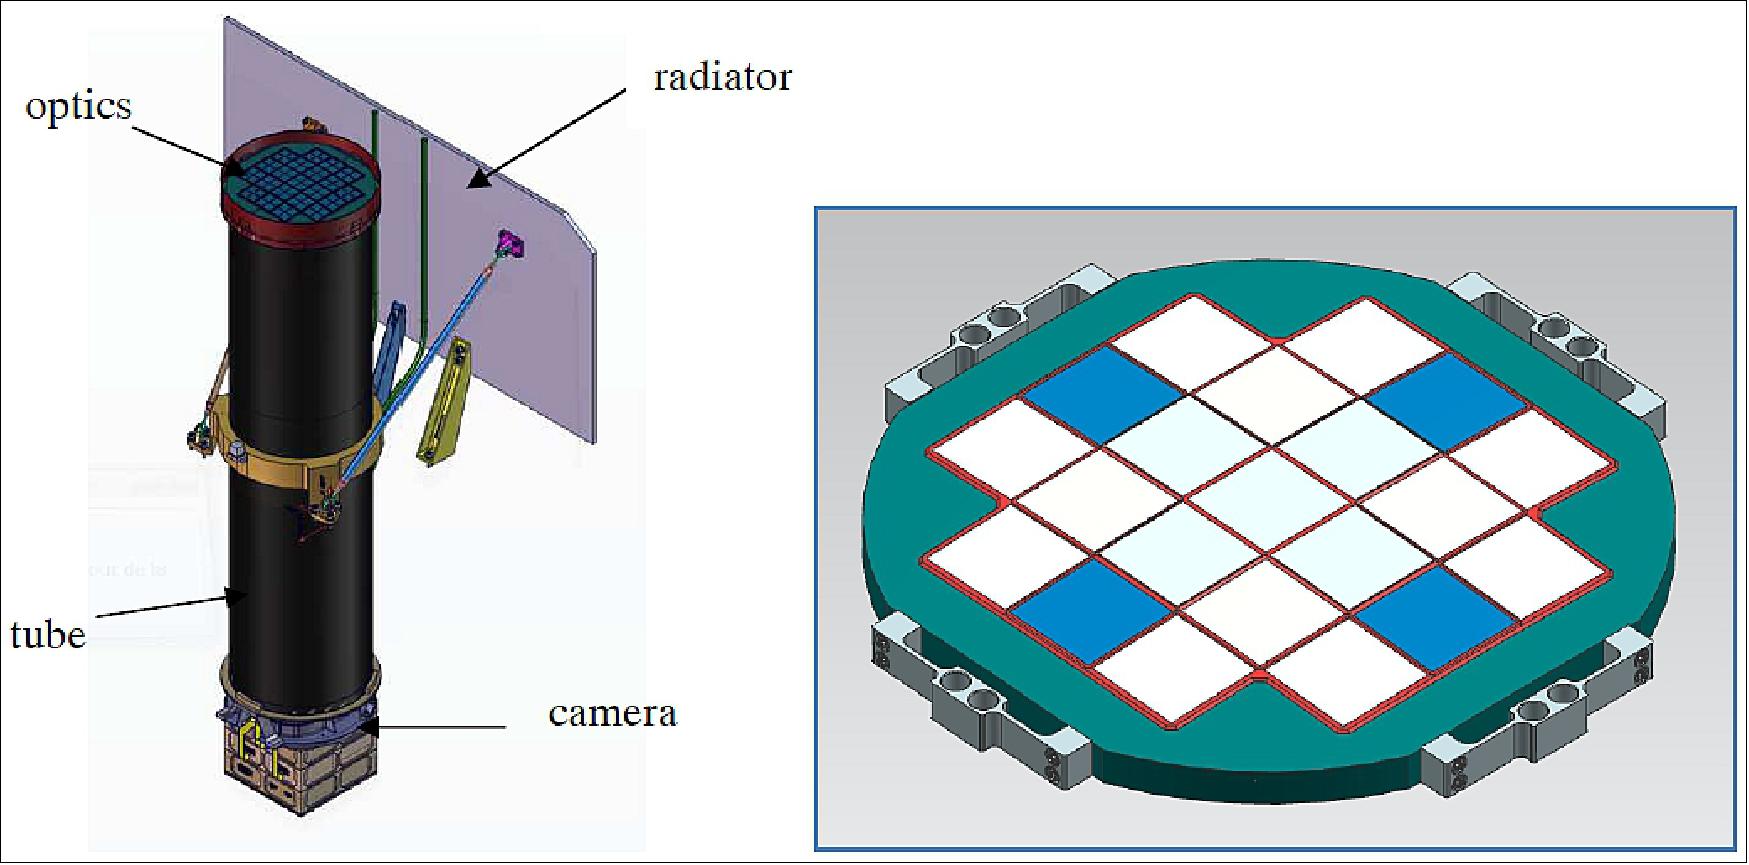 Figure 20: Left: General view of MXT; Right: Zoom on the optical module (image credit: CNES, CEA)